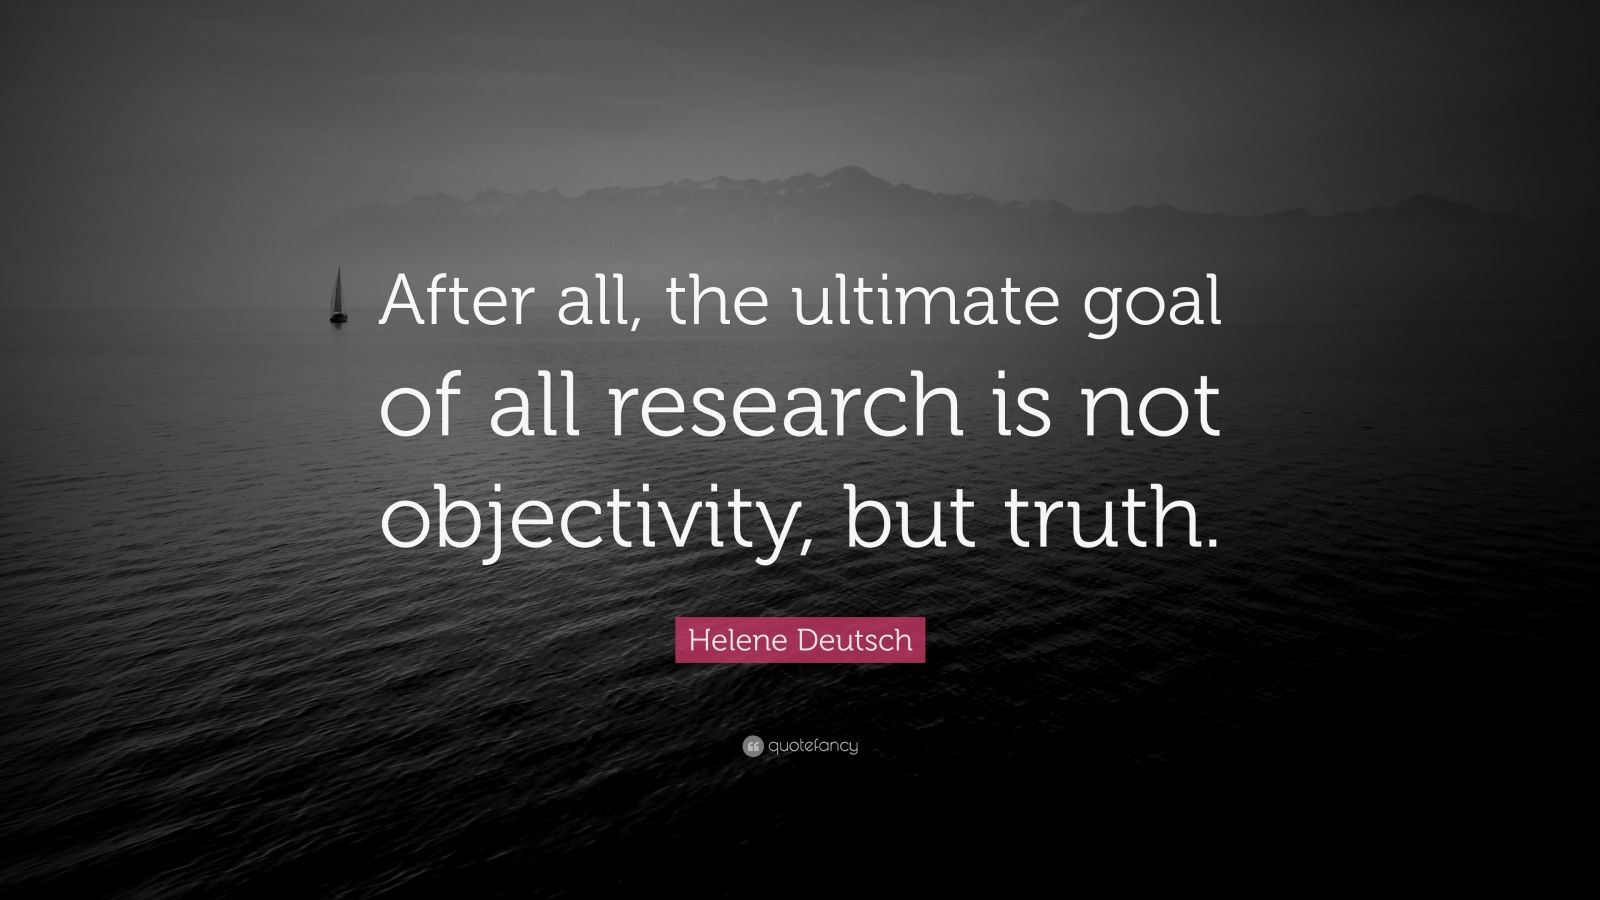 Helene Deutsch Quote: “After all, the ultimate goal of all research is